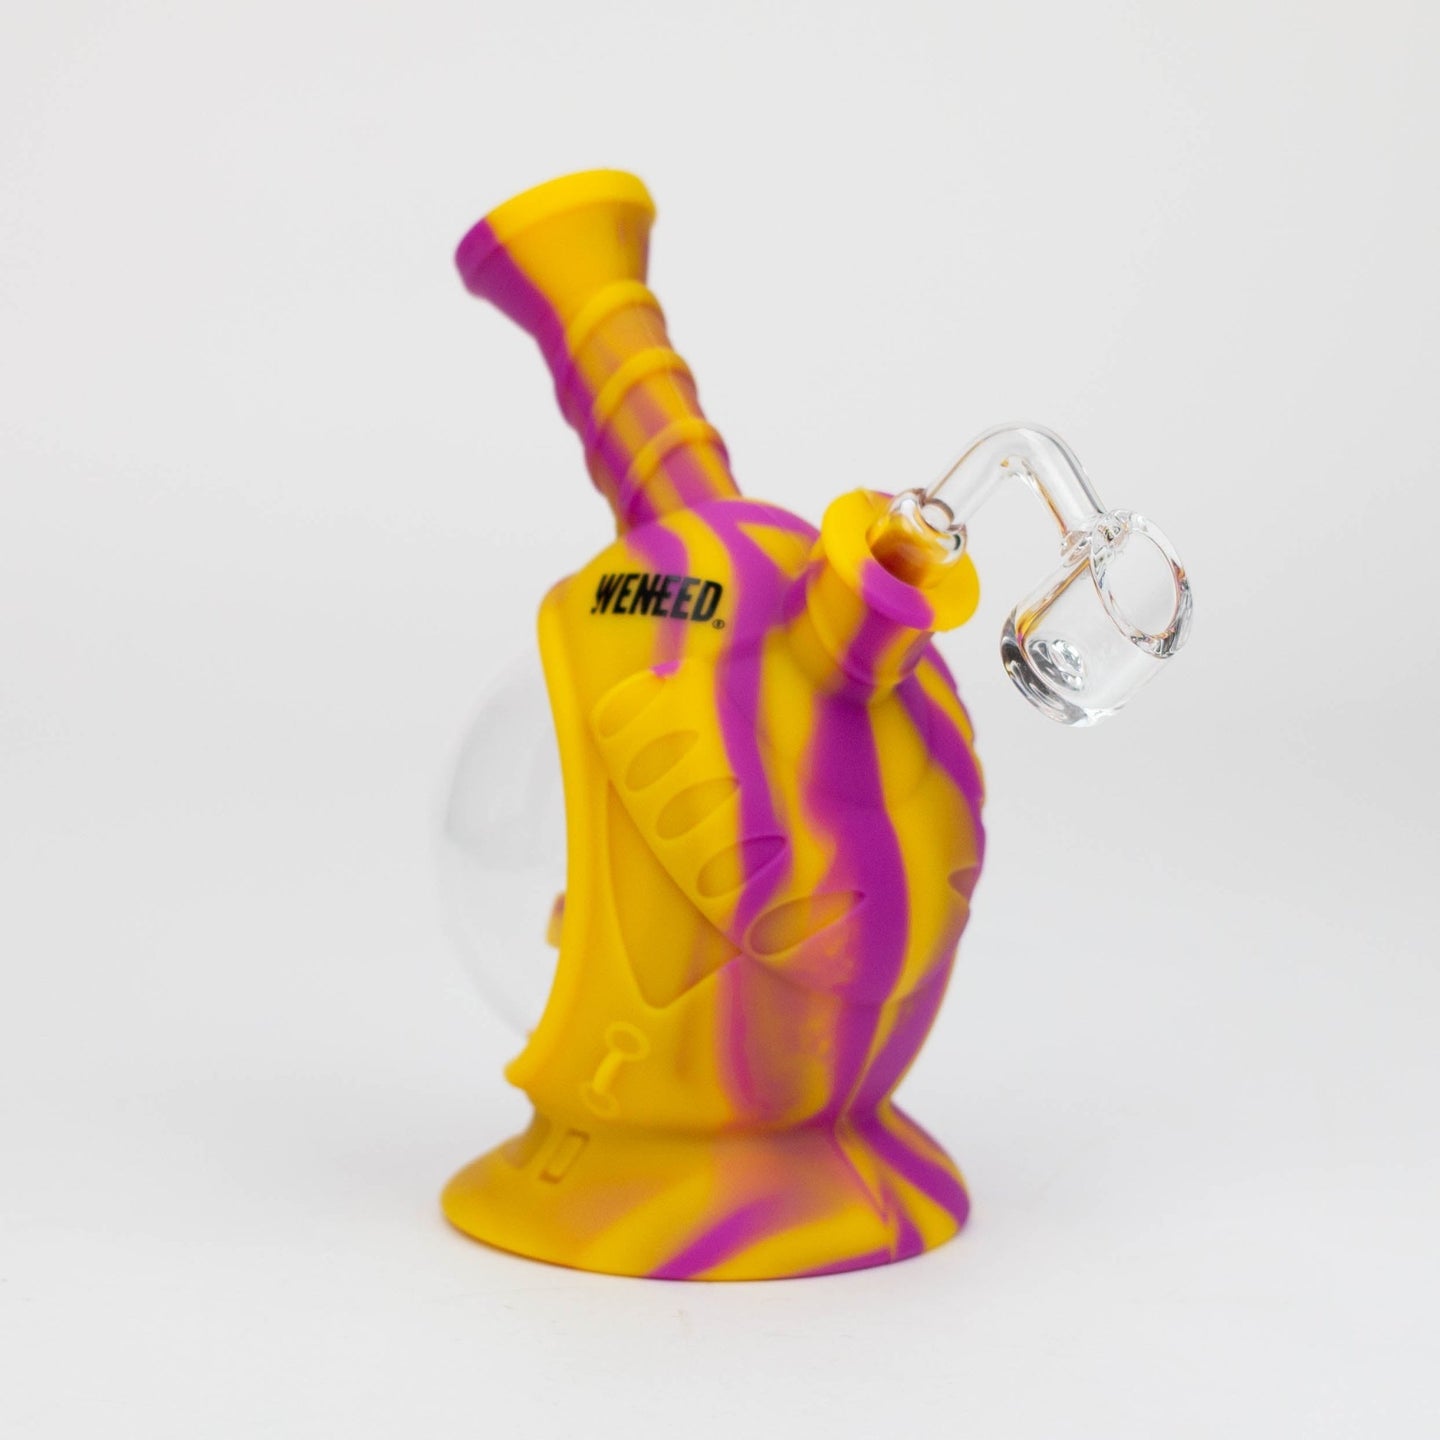 WENEED®- 7" Silicone Space Capsule Rig - Glasss Station